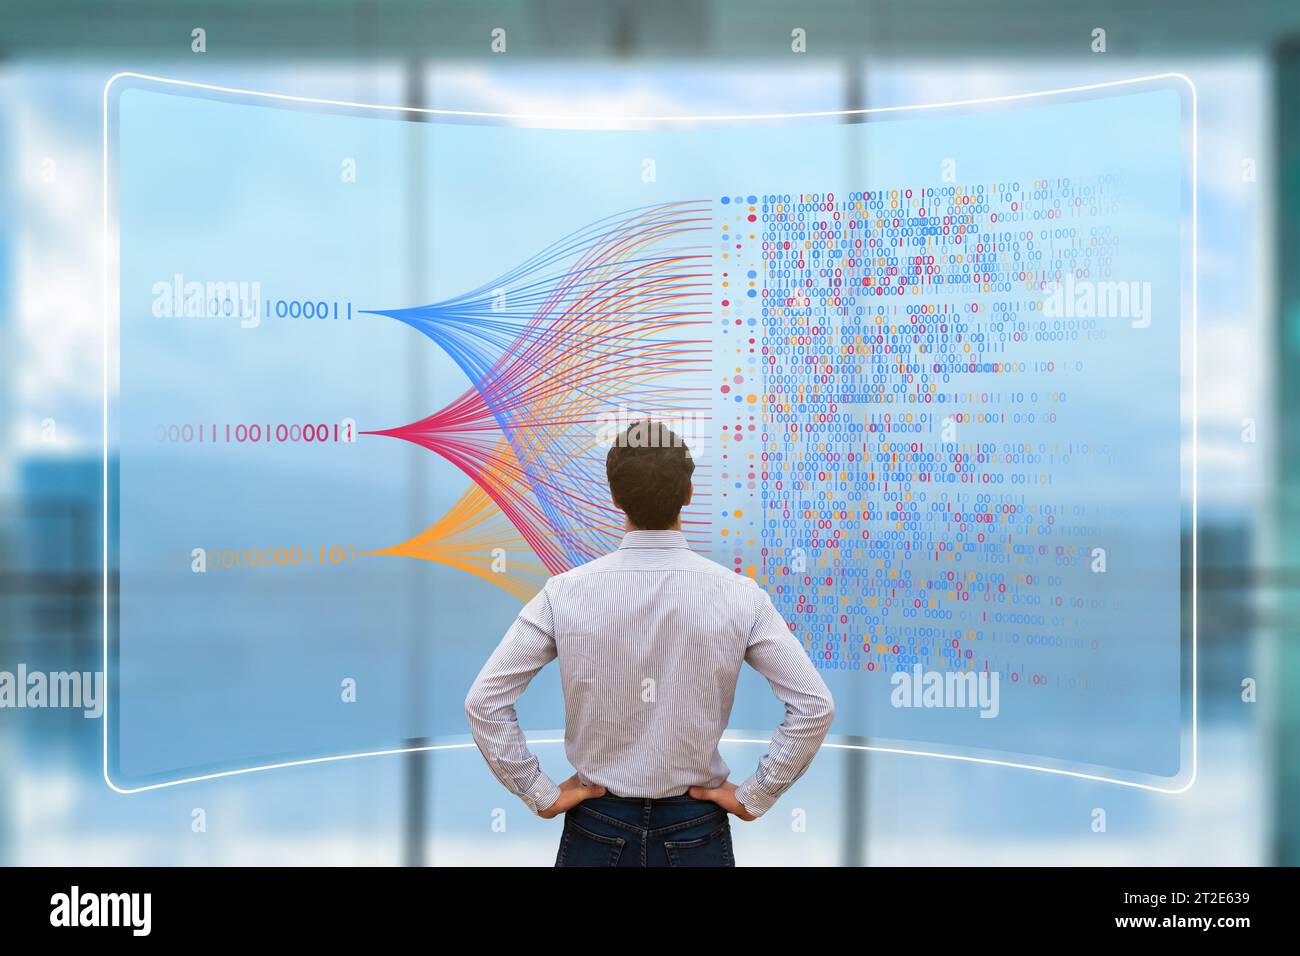 Data analytics and AI technology. Data science and big data. Scientist analysing complex data set on computer. Data mining, artificial intelligence, m Stock Photo